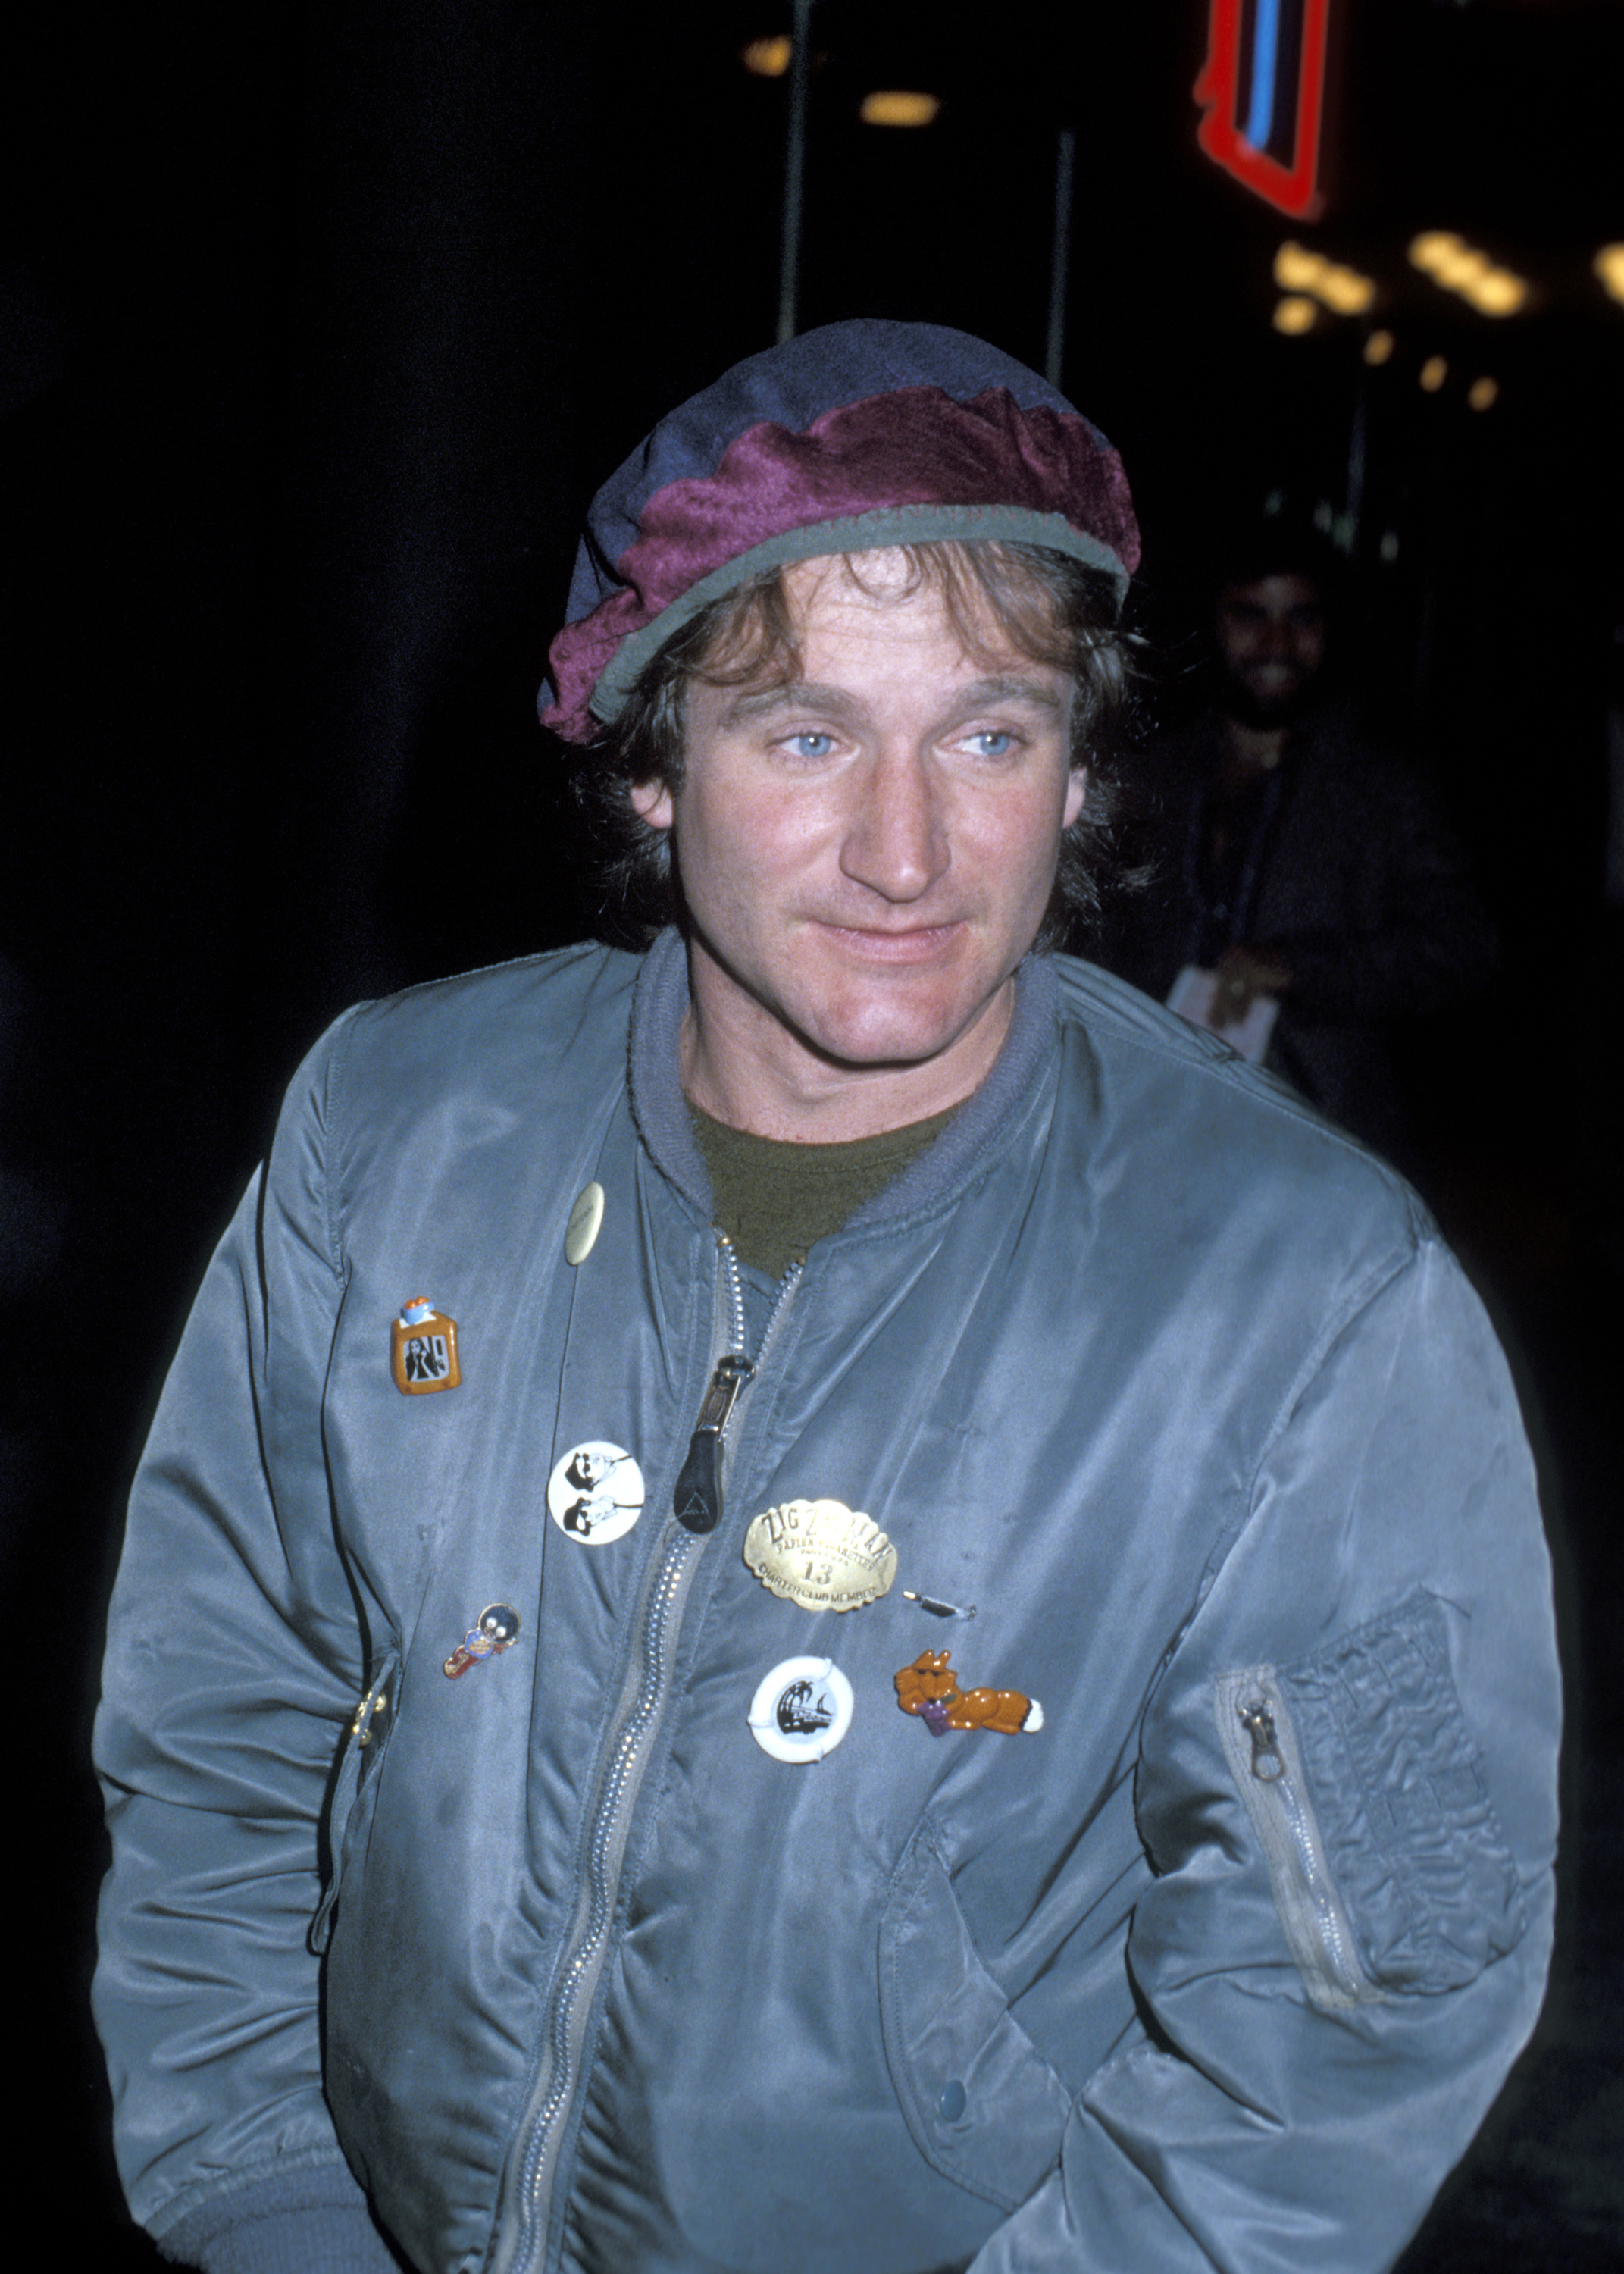 Robin Williams in a blue and purple beret and a blue bomber jacket with pins on it at the Roxy in 1979